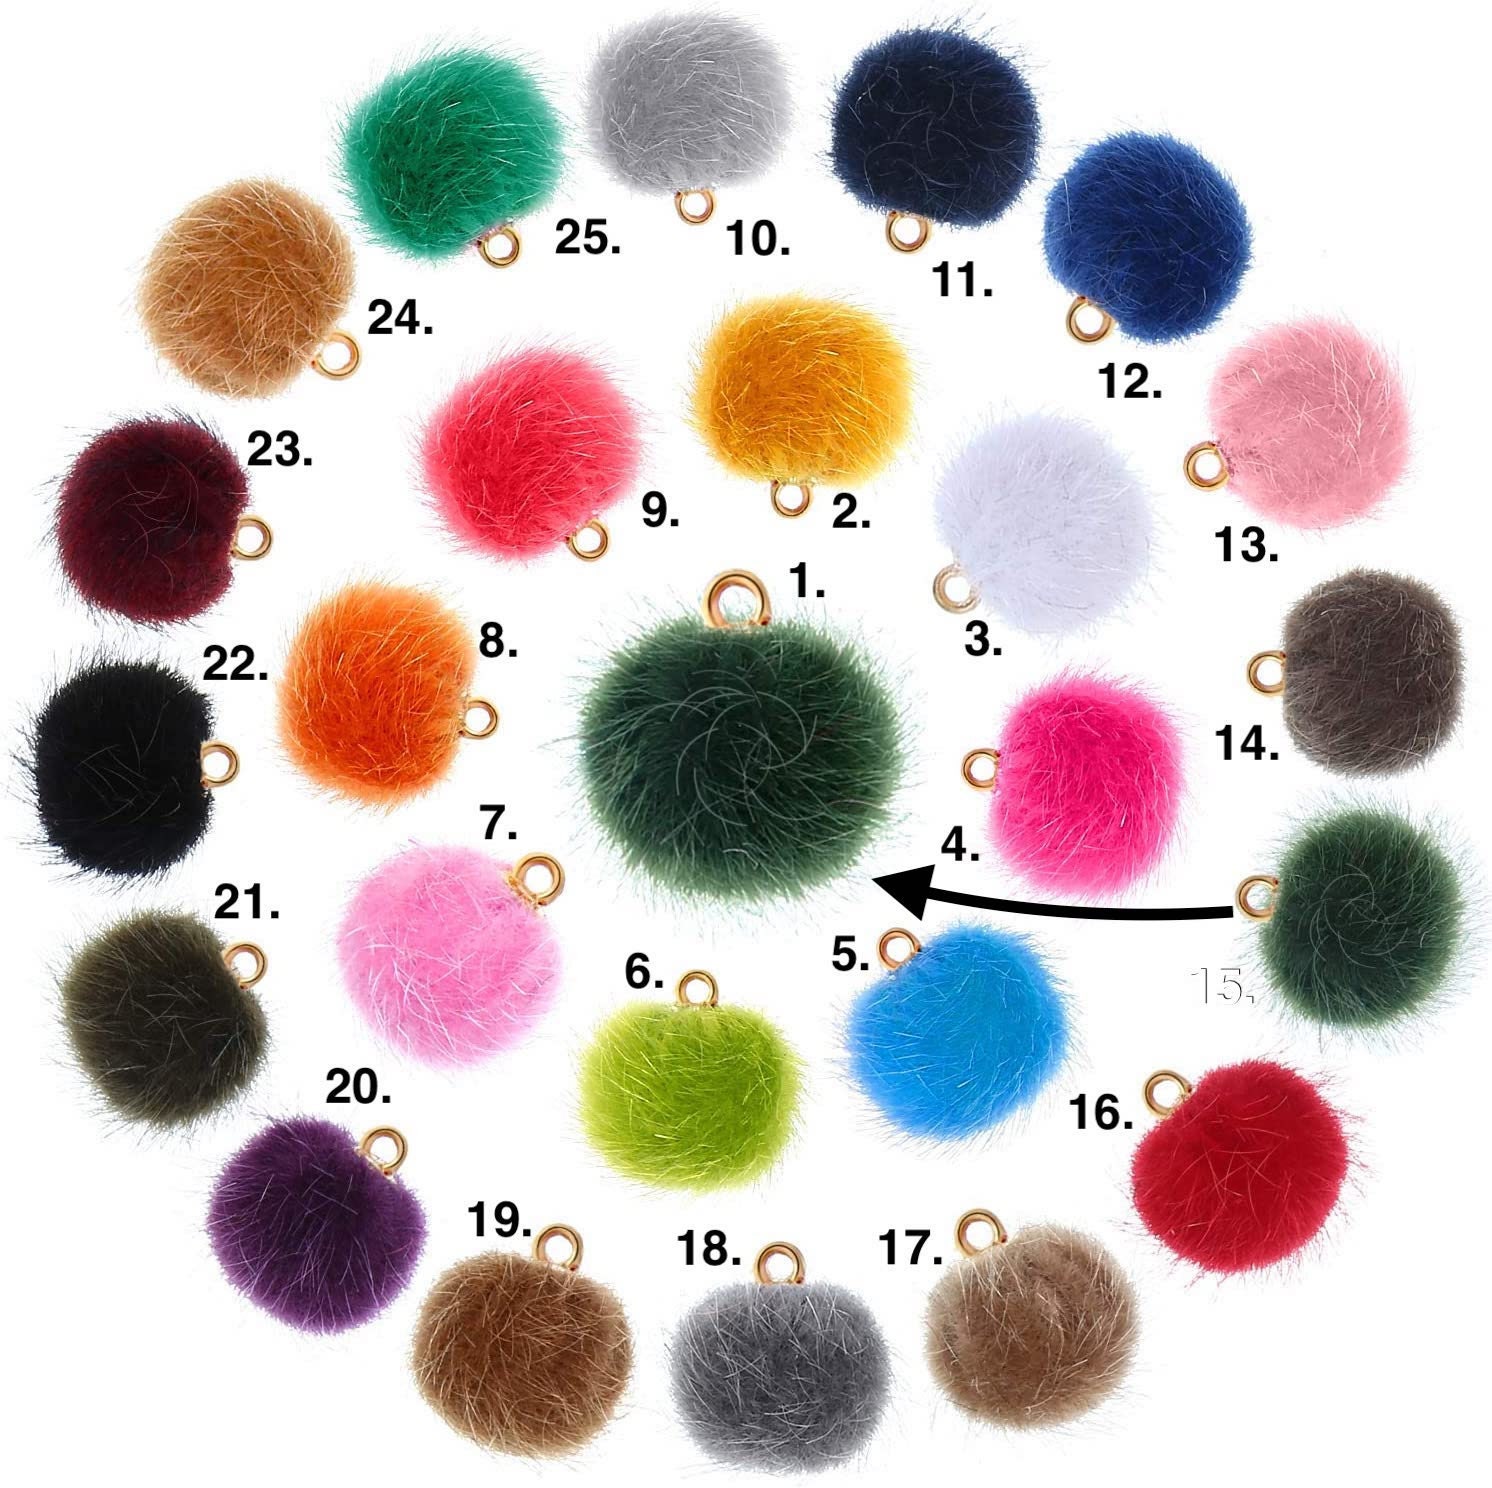 Pom Poms 400 Pieces 6 MM Tiny Balls for Crafts Choose Mixed Color